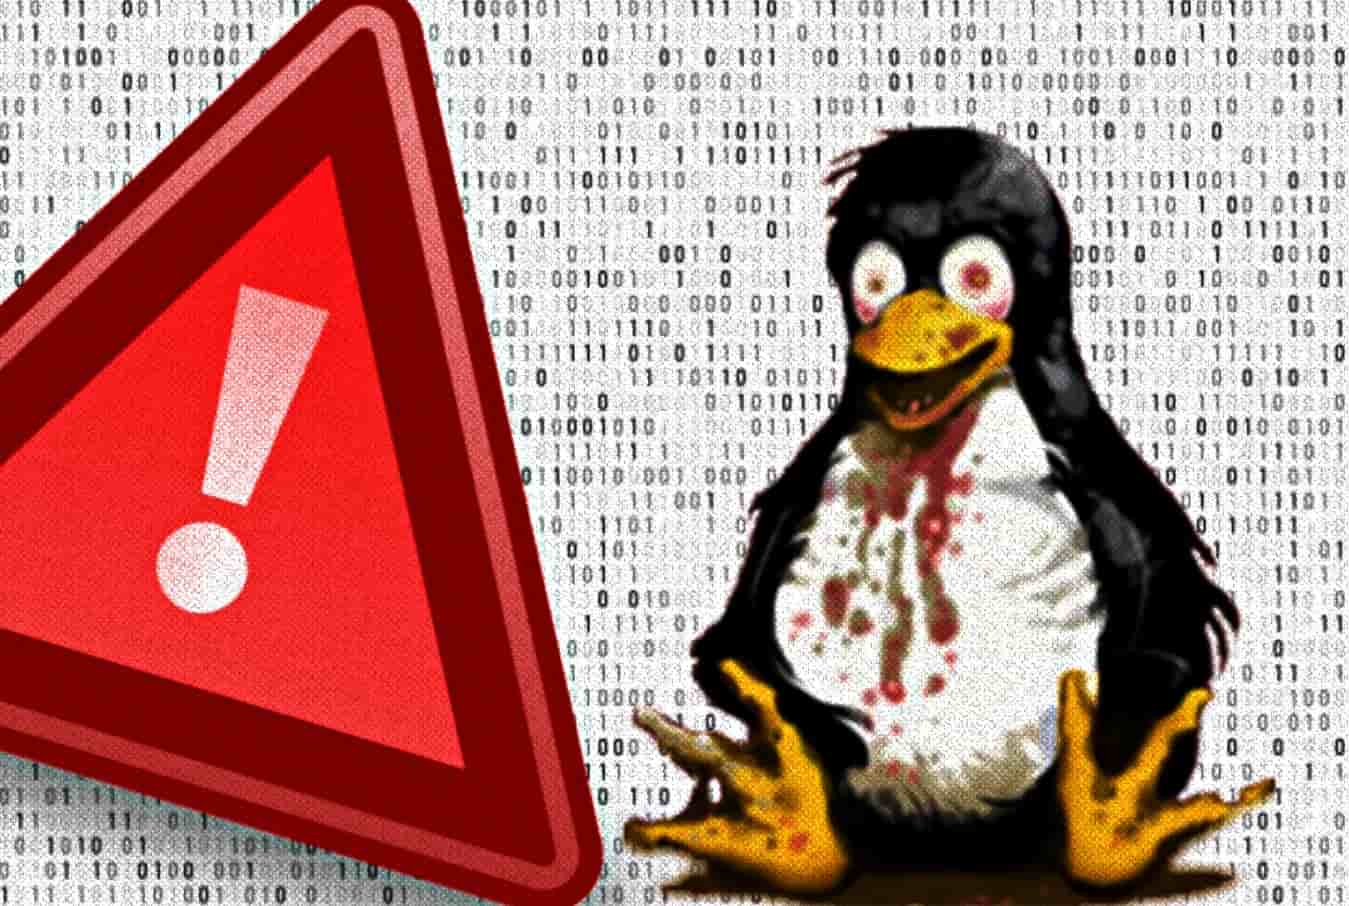 Ongoing 'FreakOut' malware attack turns Linux devices into IRC botnet